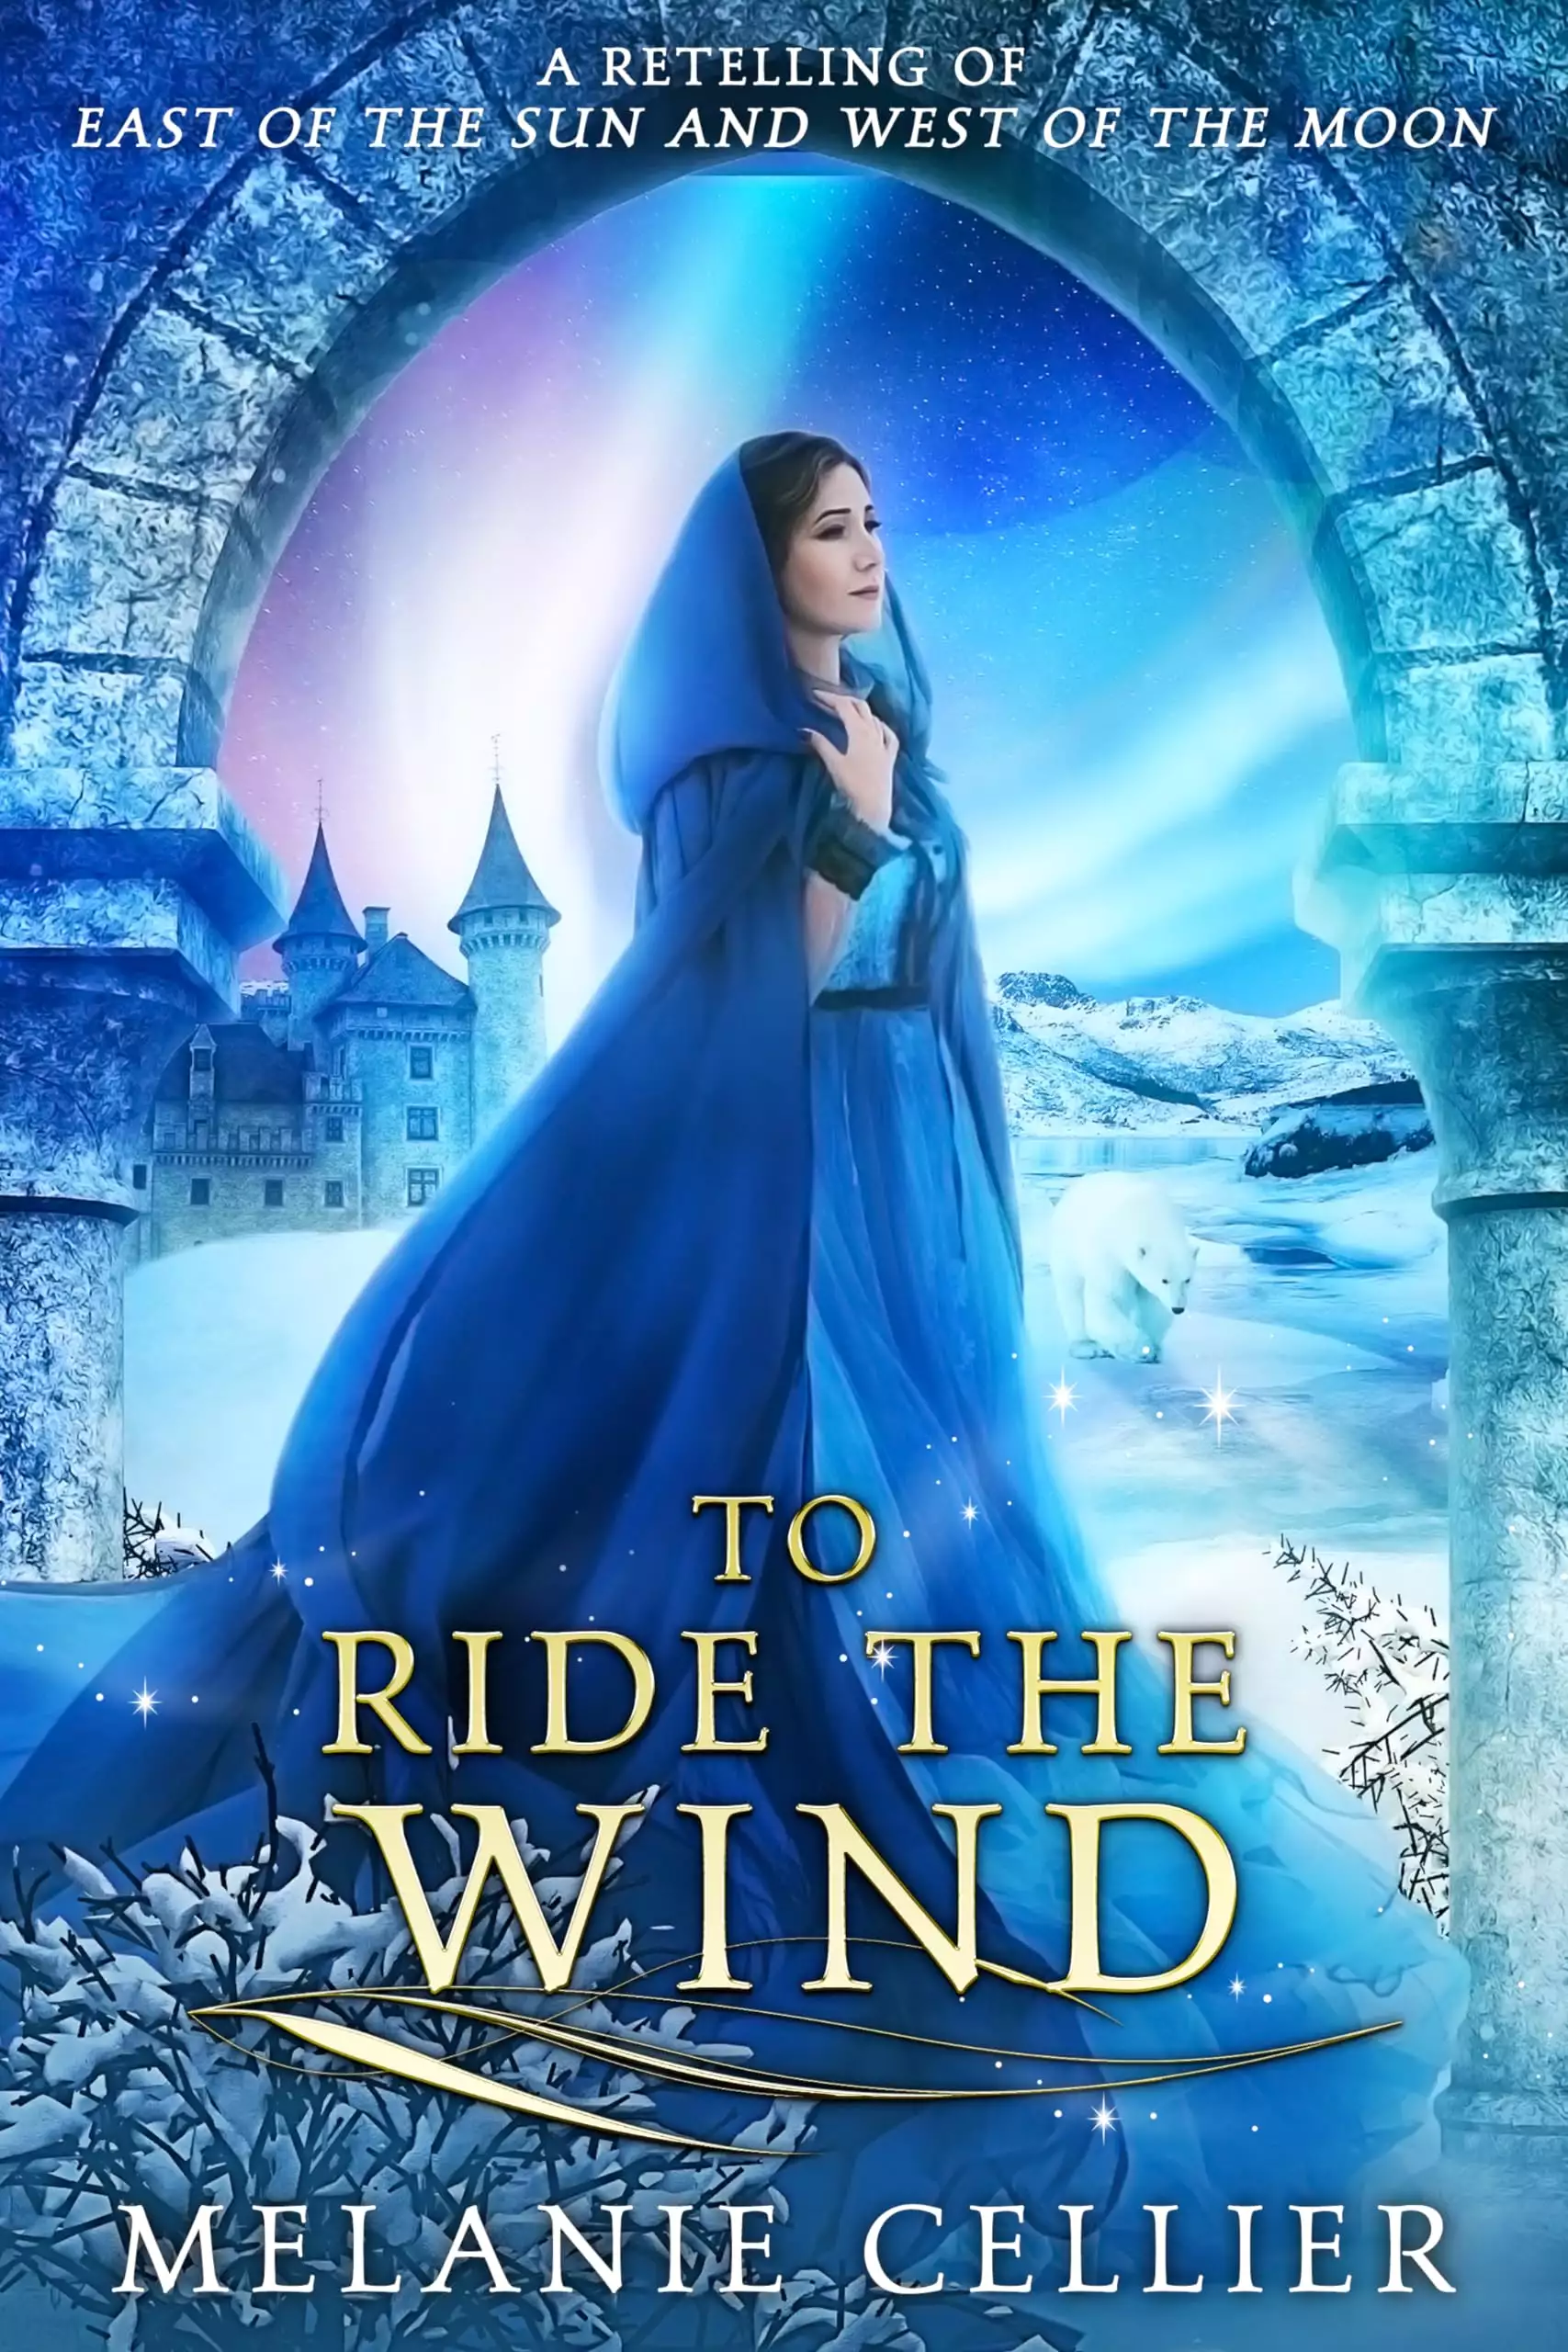 To Ride the Wind: A Retelling of East of the Sun and West of the Moon